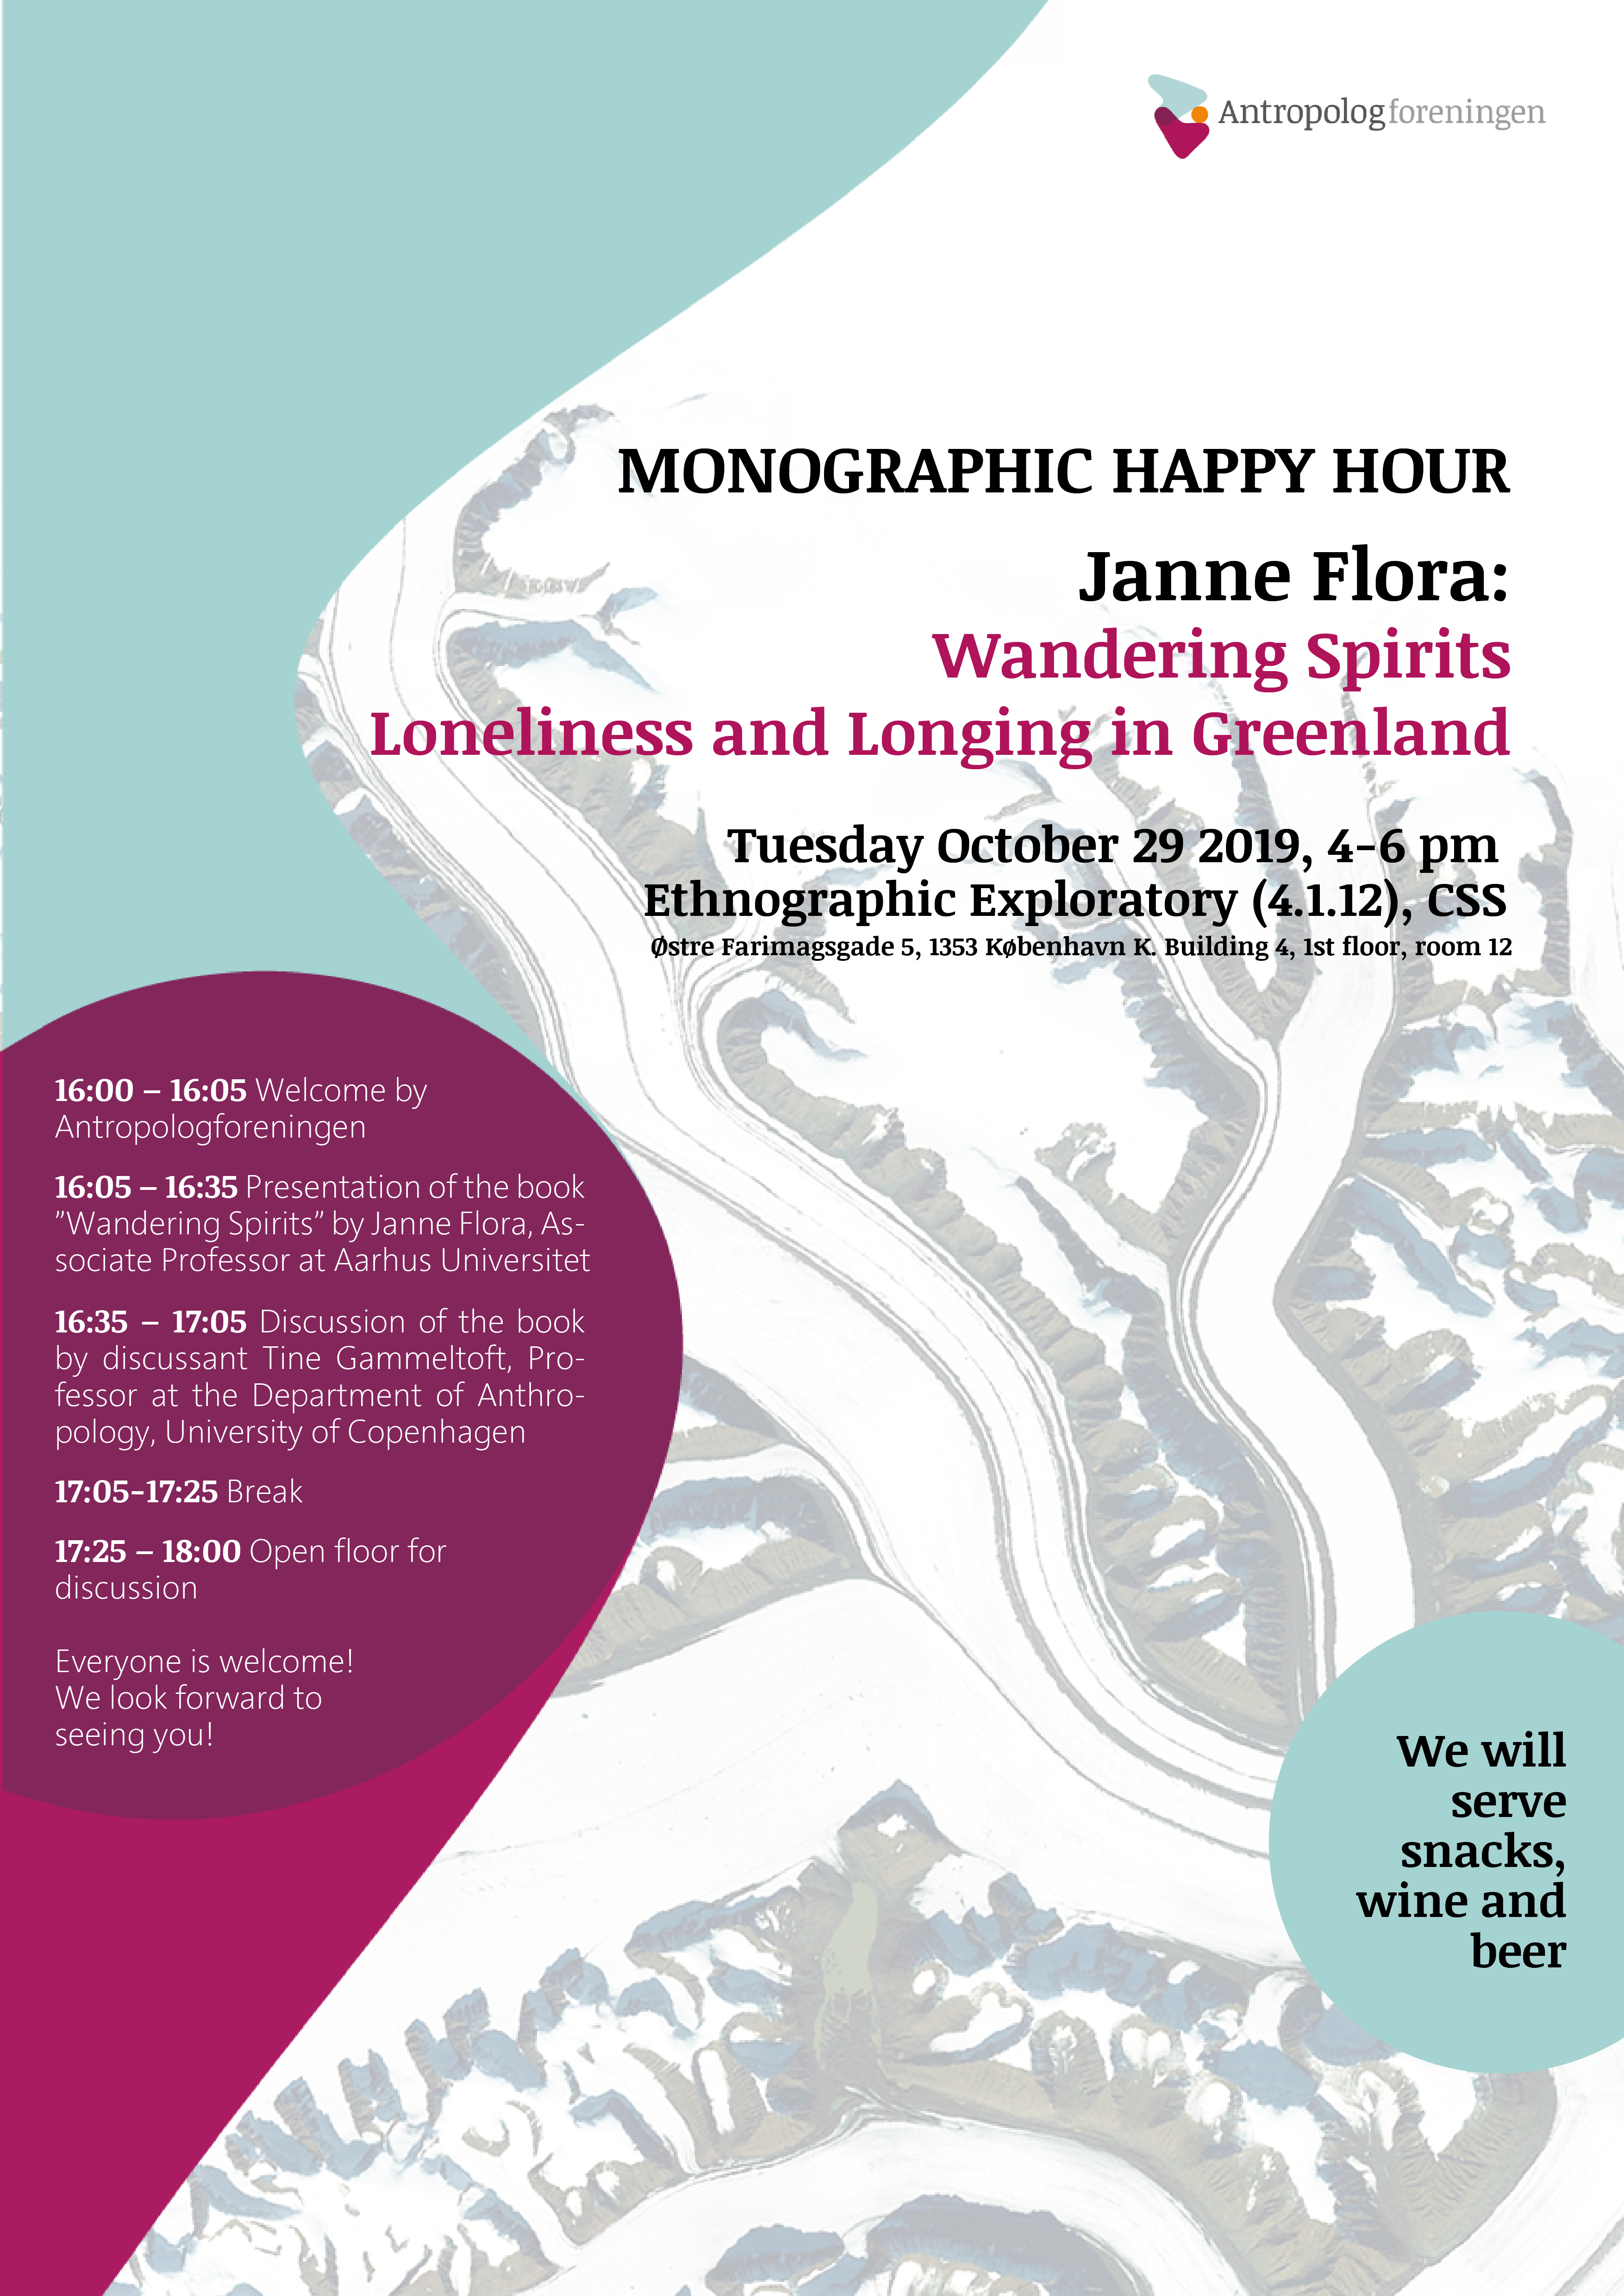 Monographic Happy Hour with Janne Flora